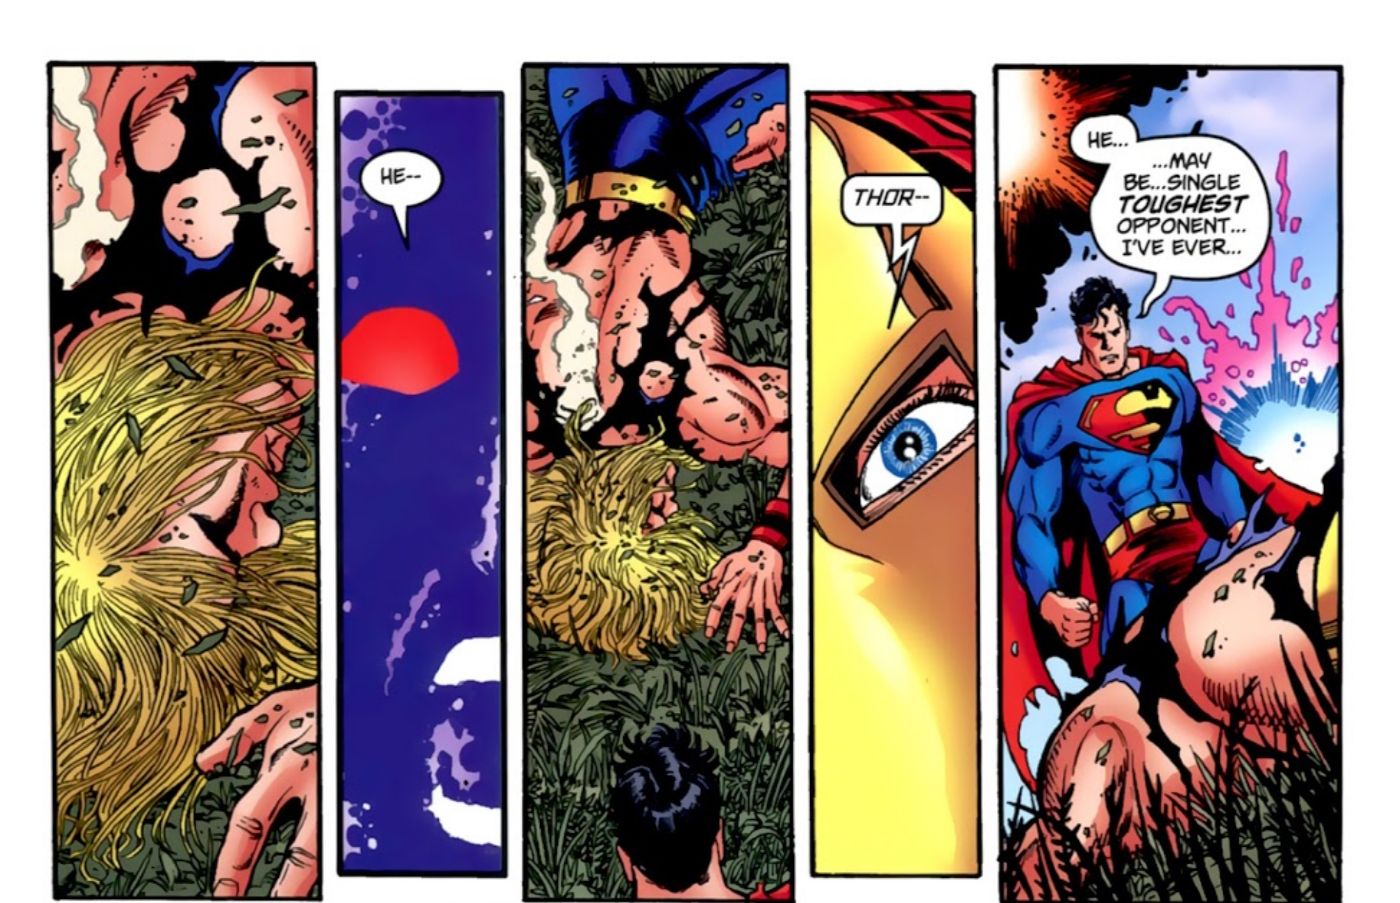 Superman Knocks Thor Unconcious With One Major Punch